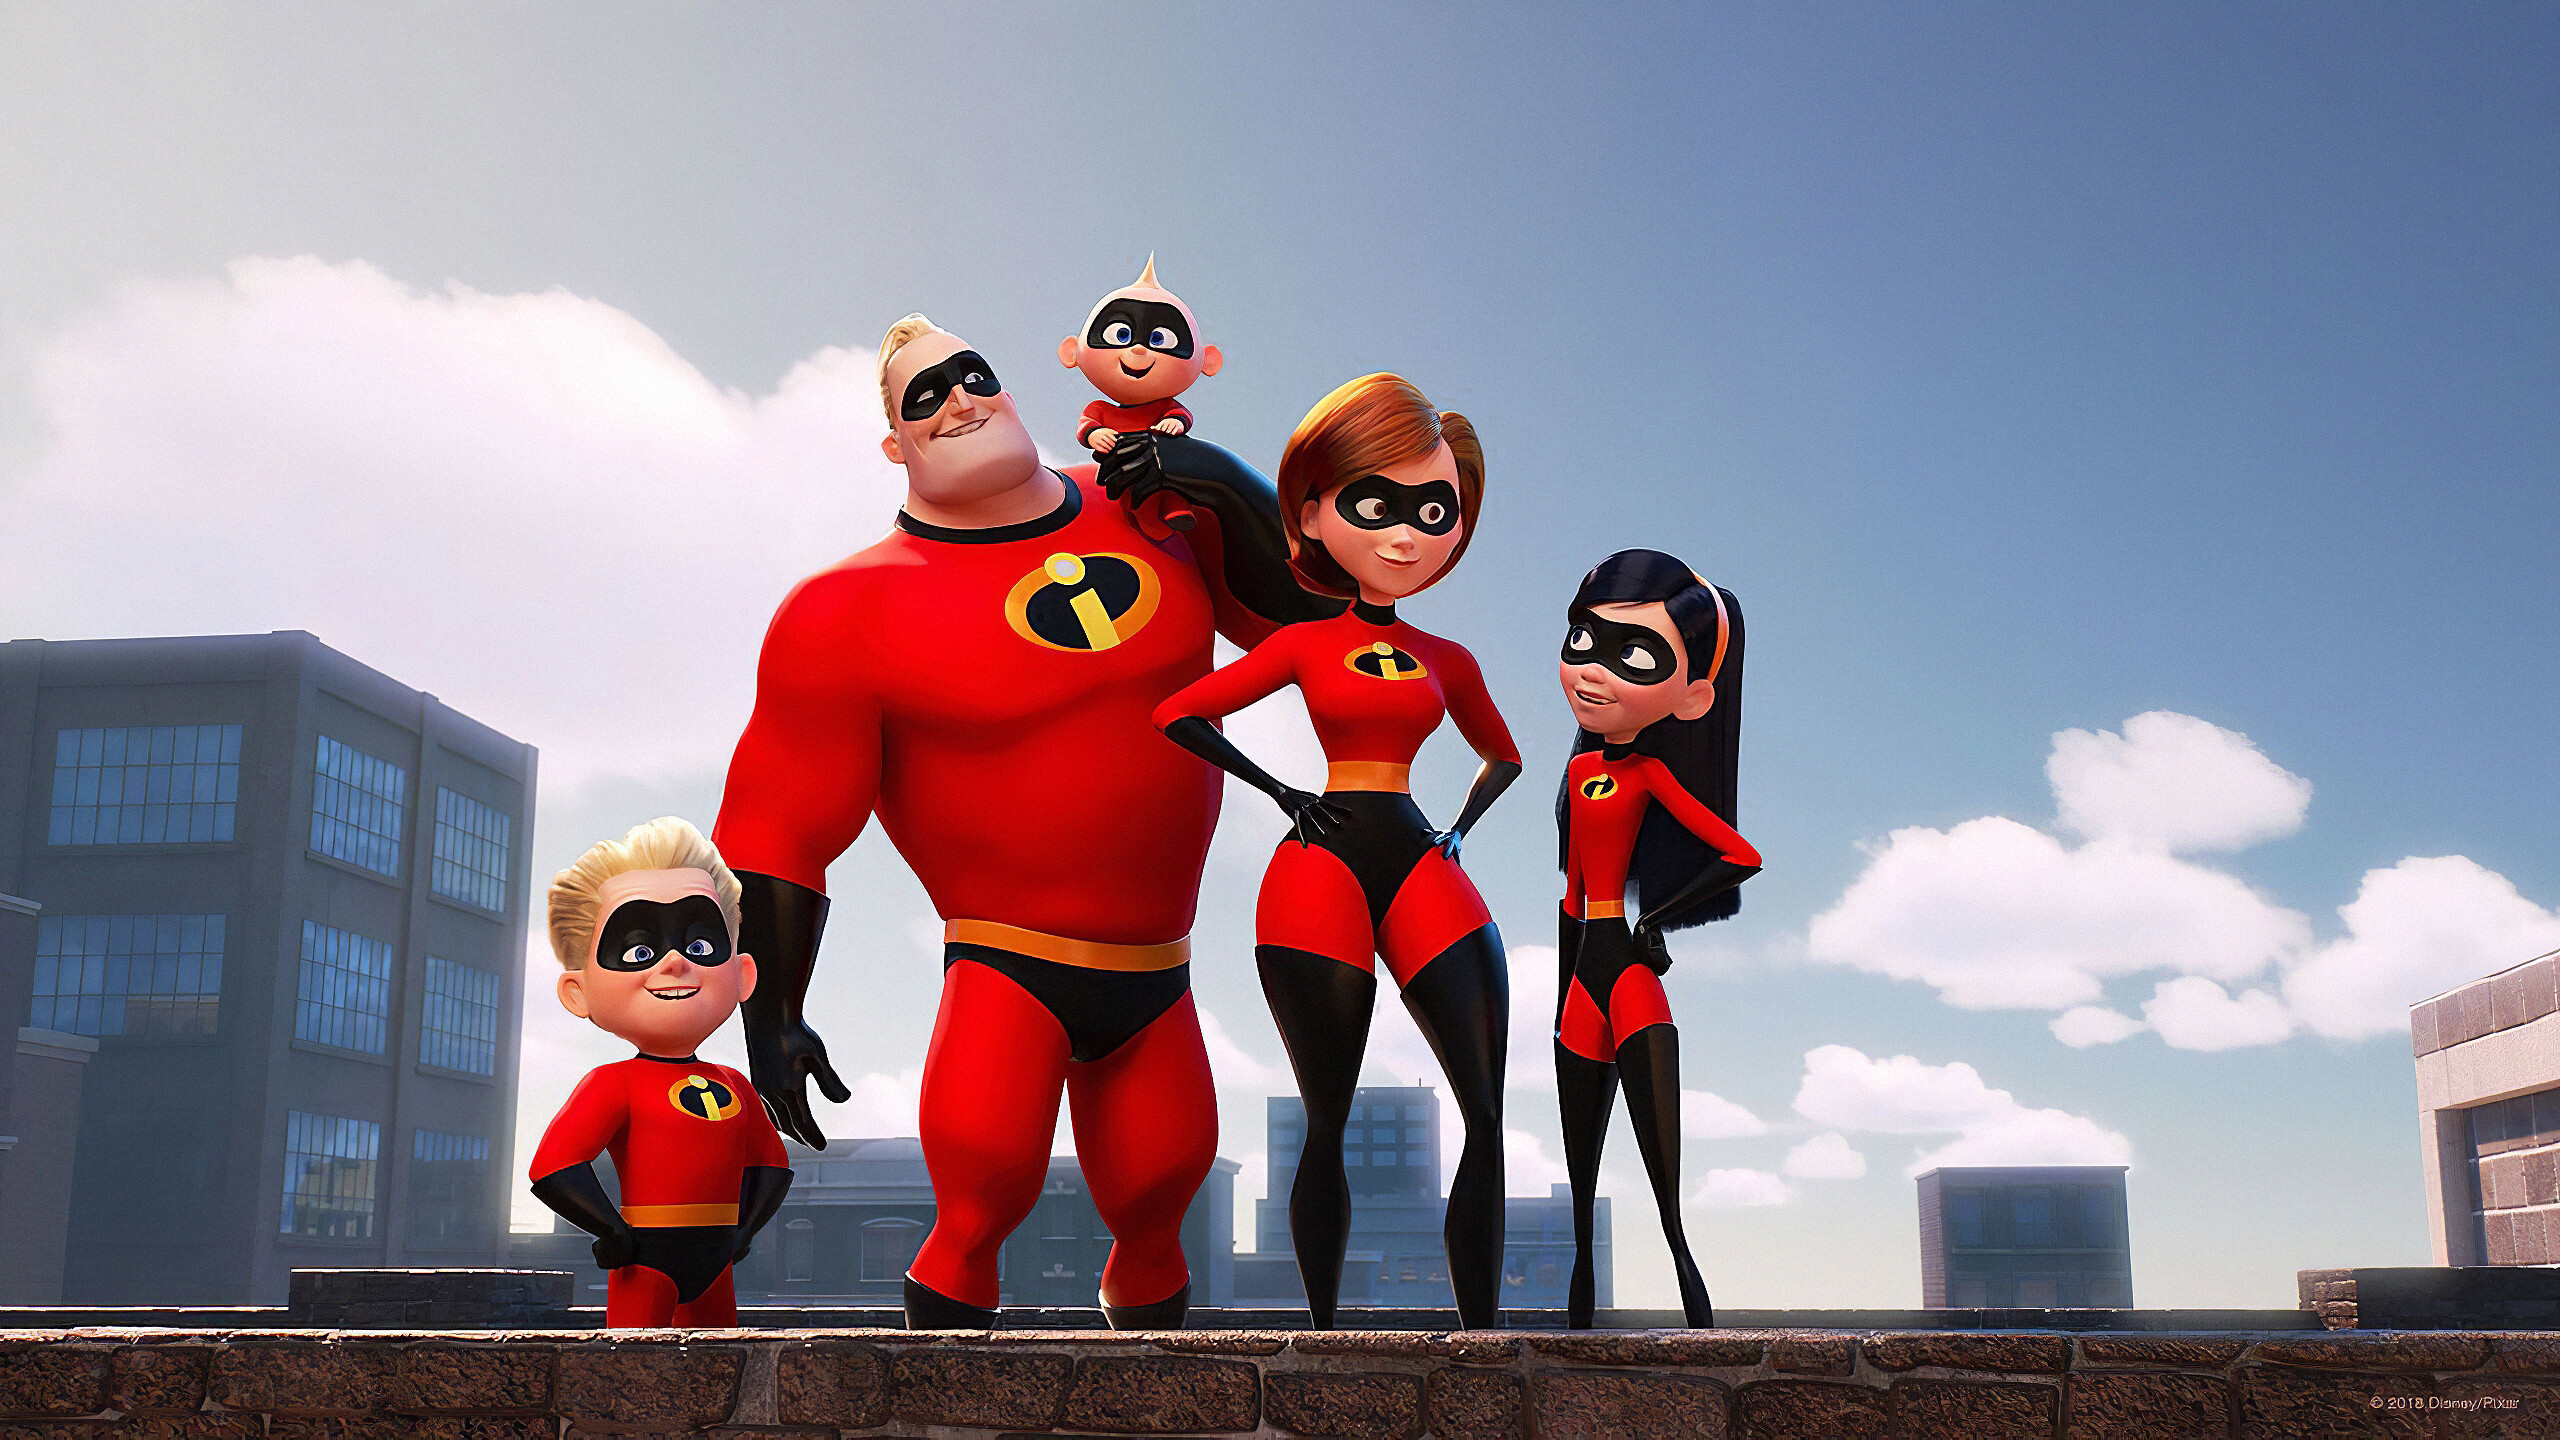 The Incredibles: Bob and Helen Parr, a couple of superheroes, known as Mr. Incredible and Elastigirl. 2560x1440 HD Wallpaper.